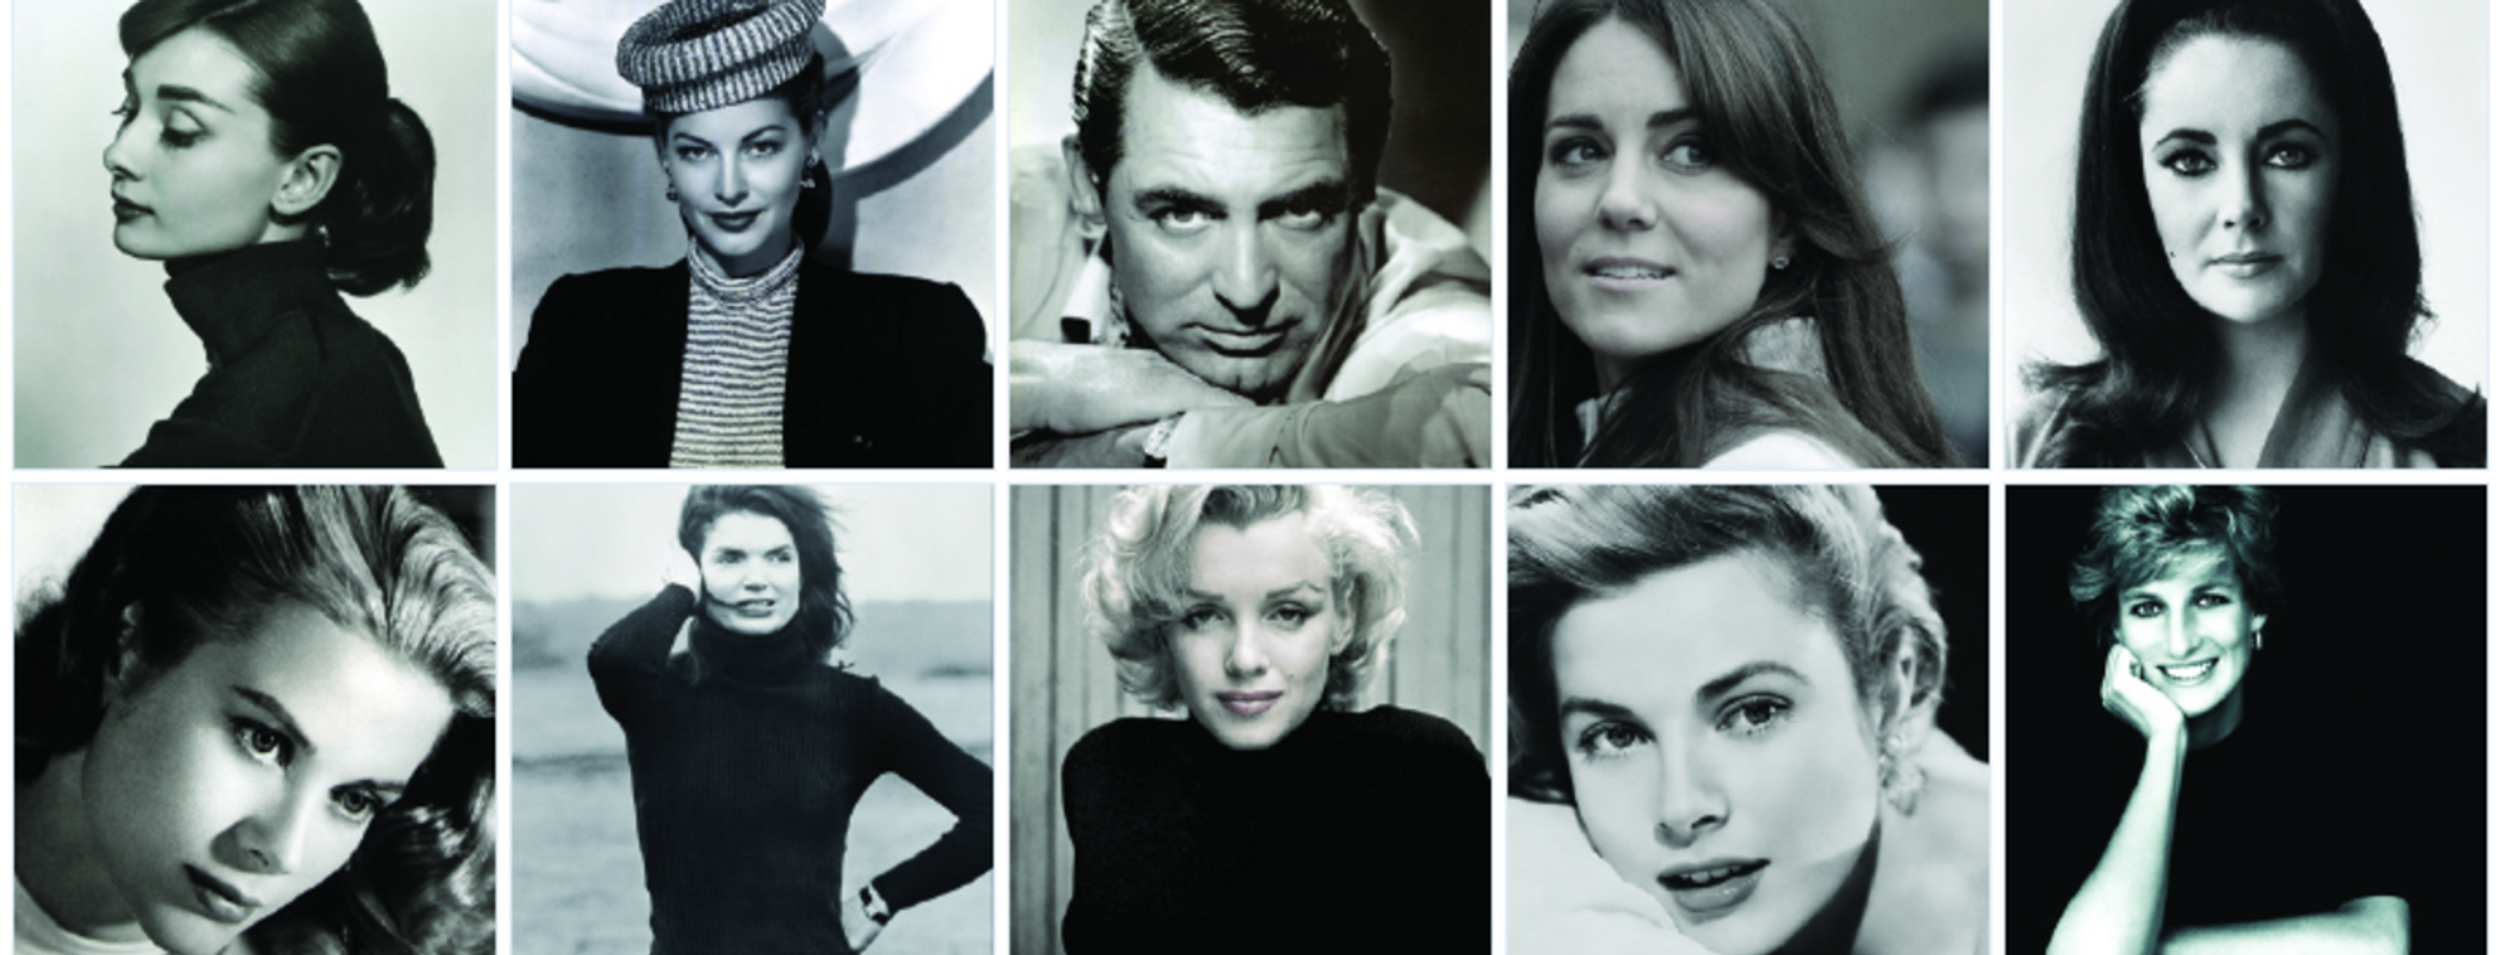 The Famous Faces of N.Peal ... Iconic Cashmere Since 1936